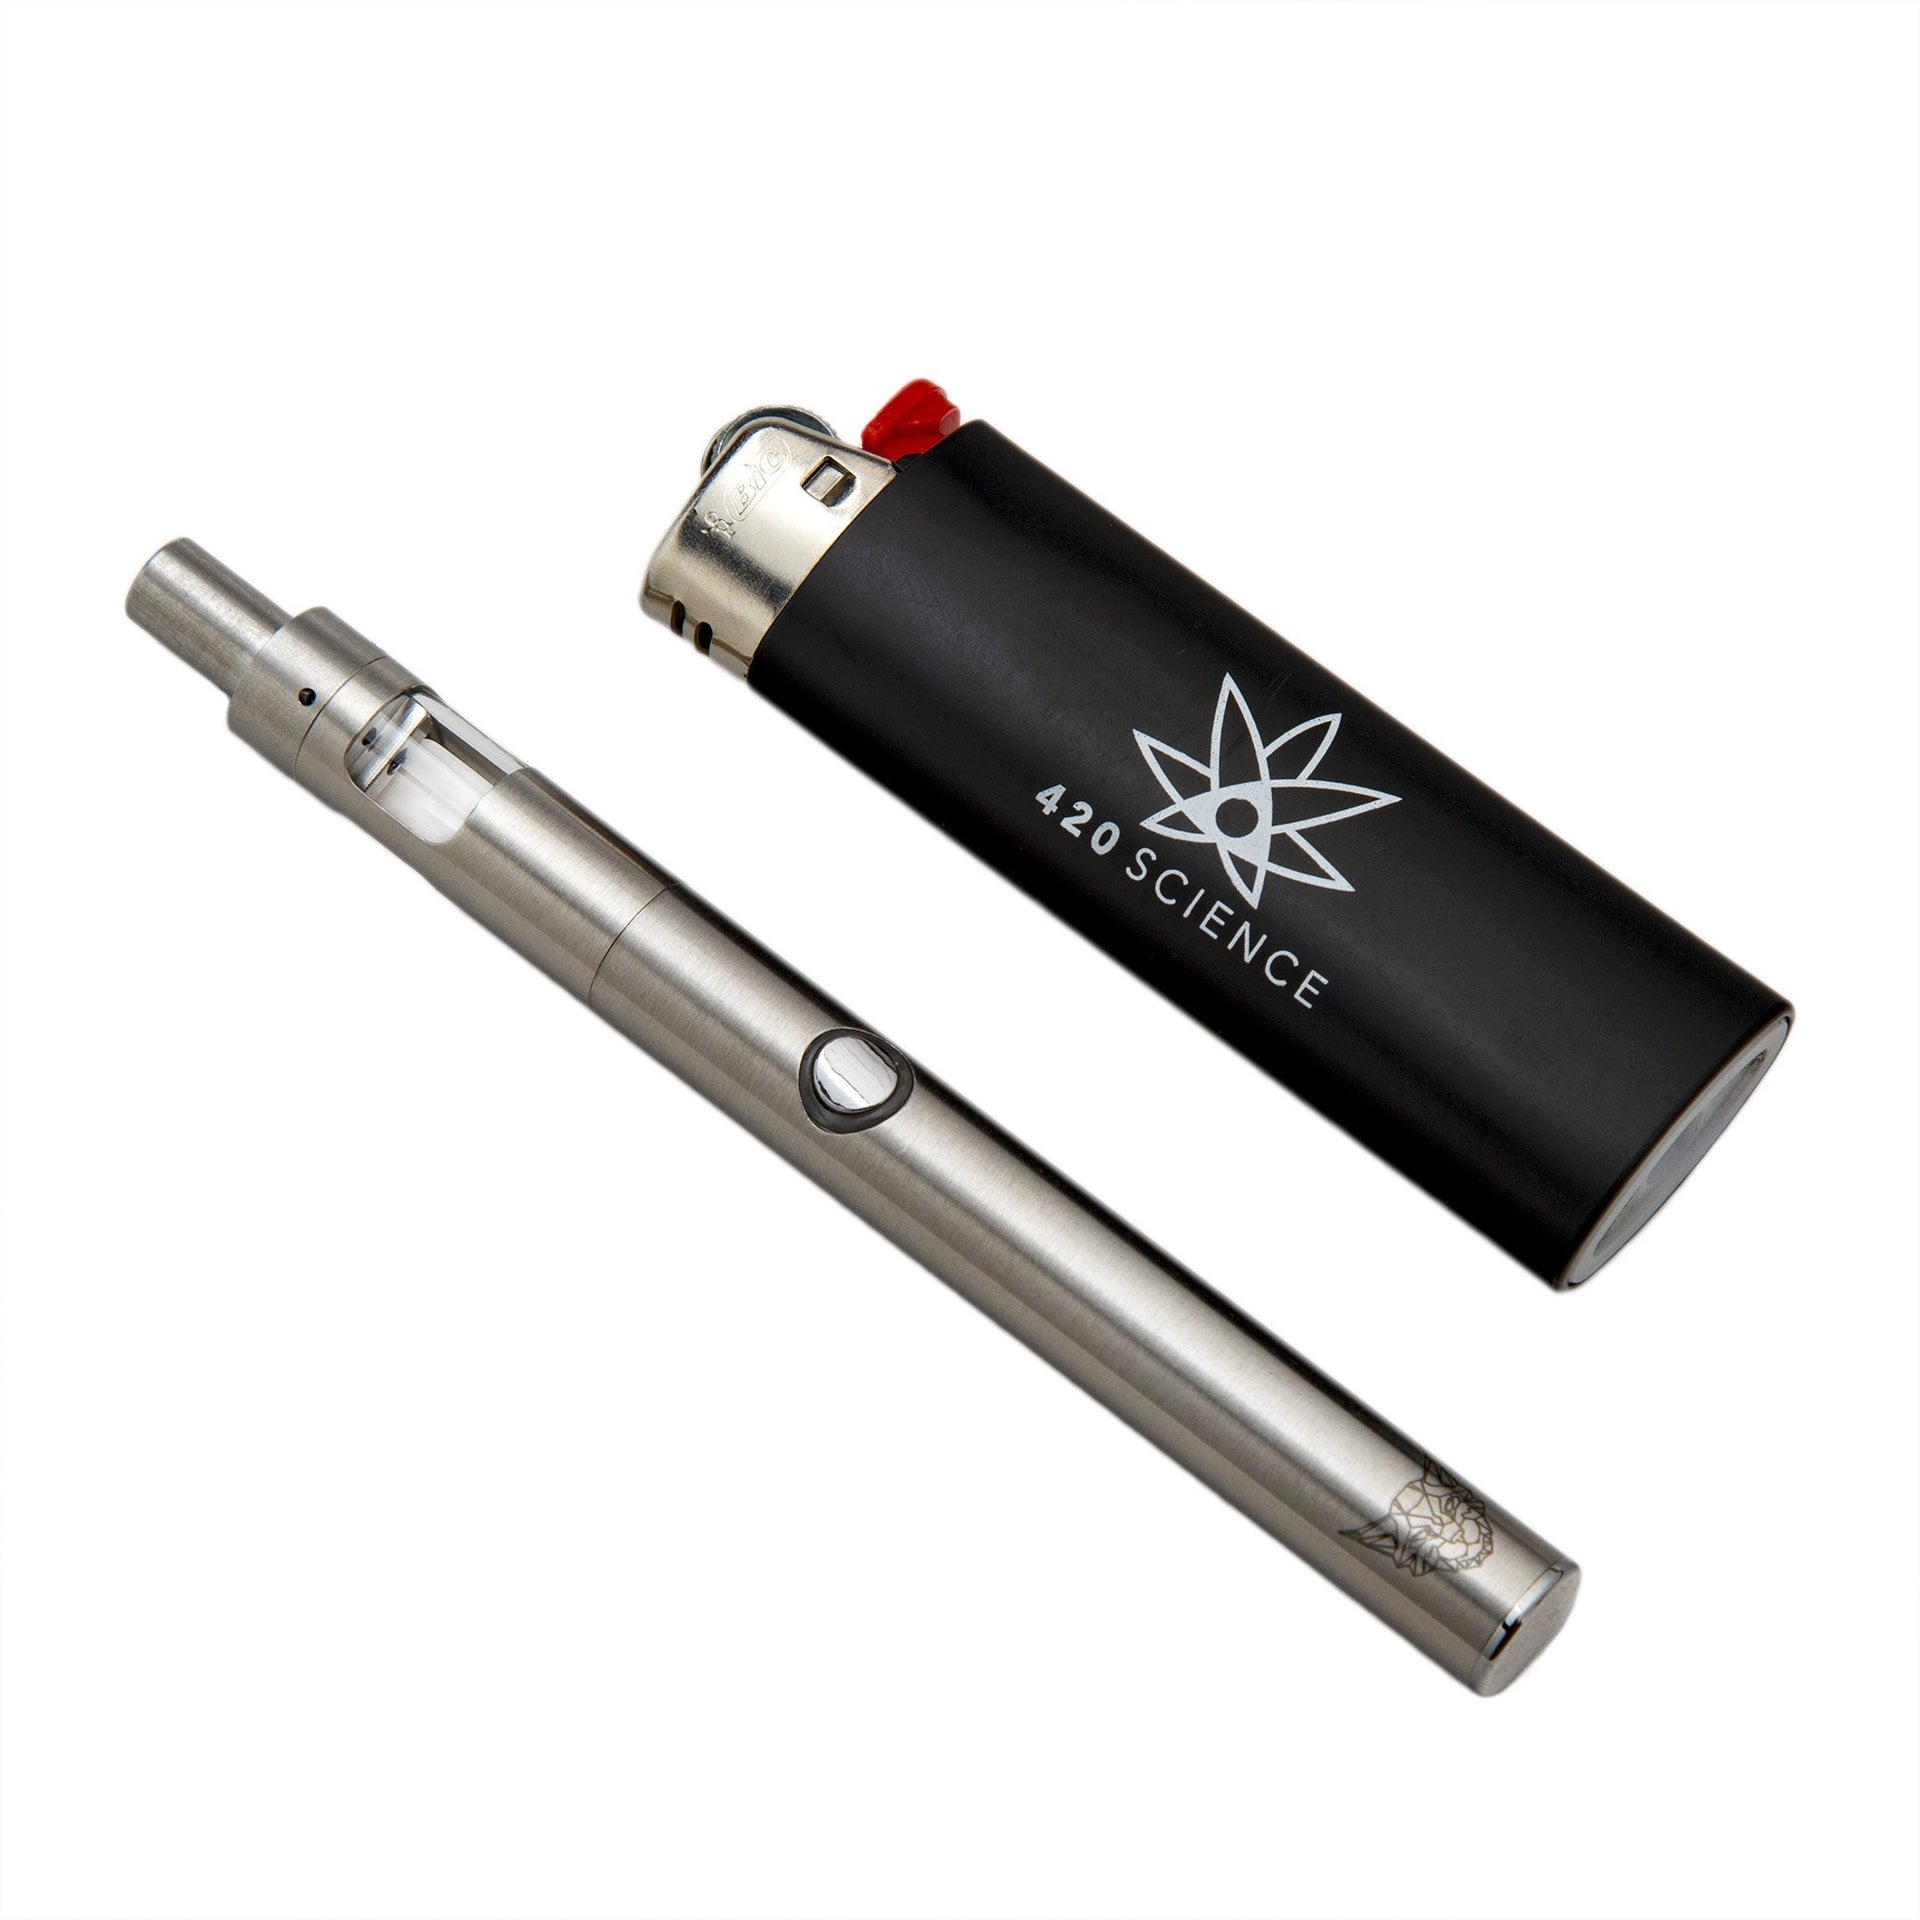 LINX Ember Dab Pen - 420 Science - The most trusted online smoke shop.